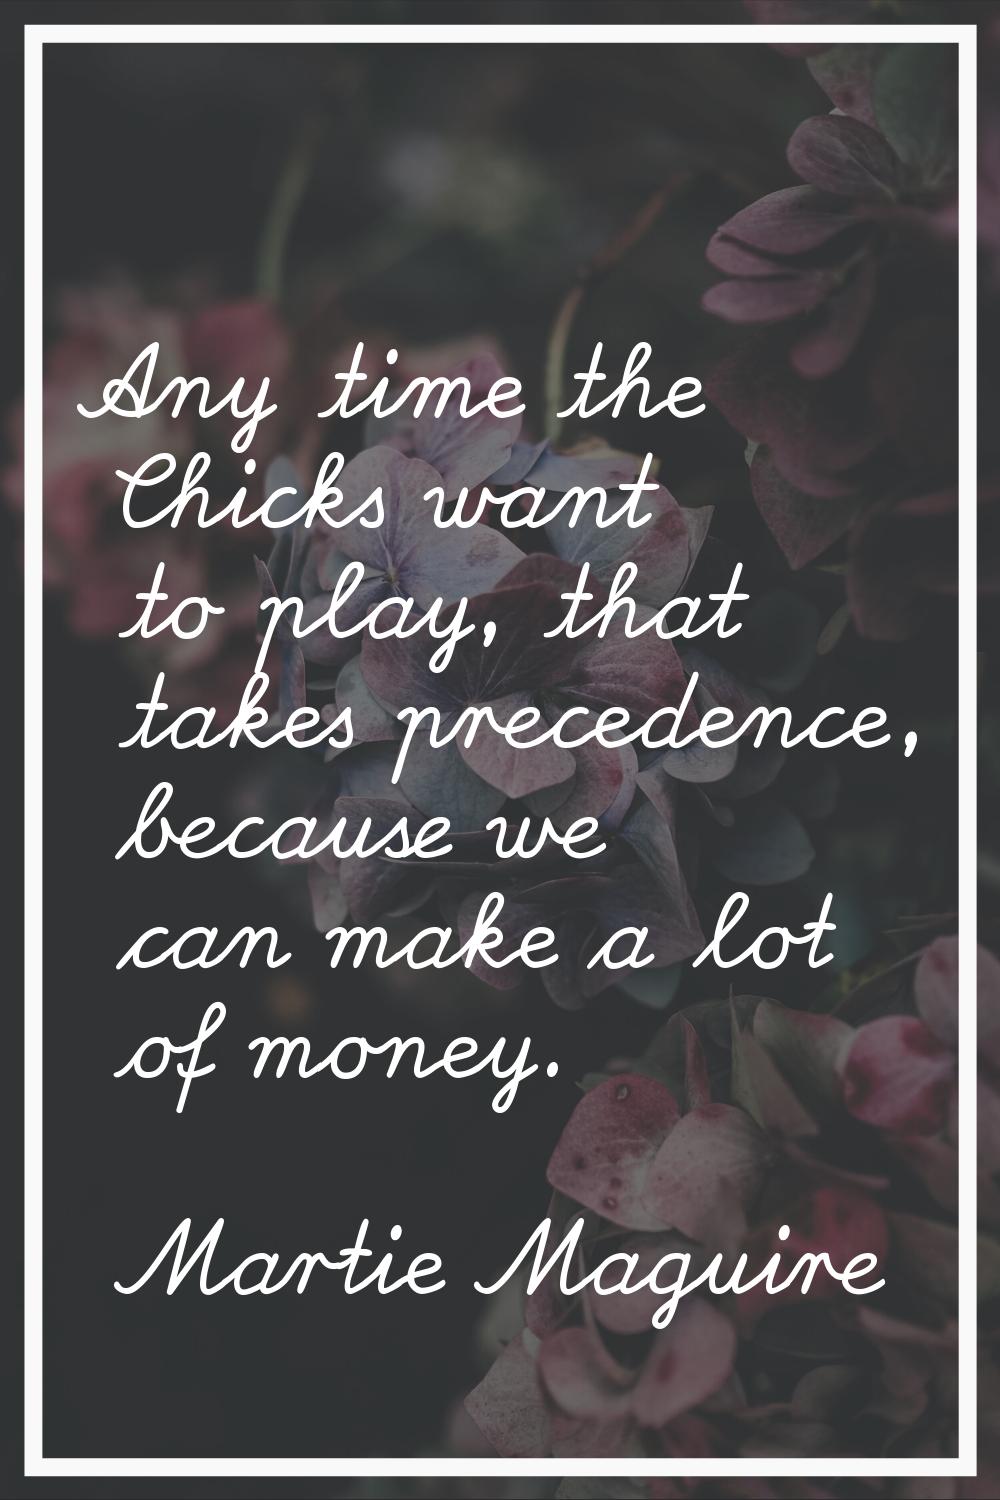 Any time the Chicks want to play, that takes precedence, because we can make a lot of money.